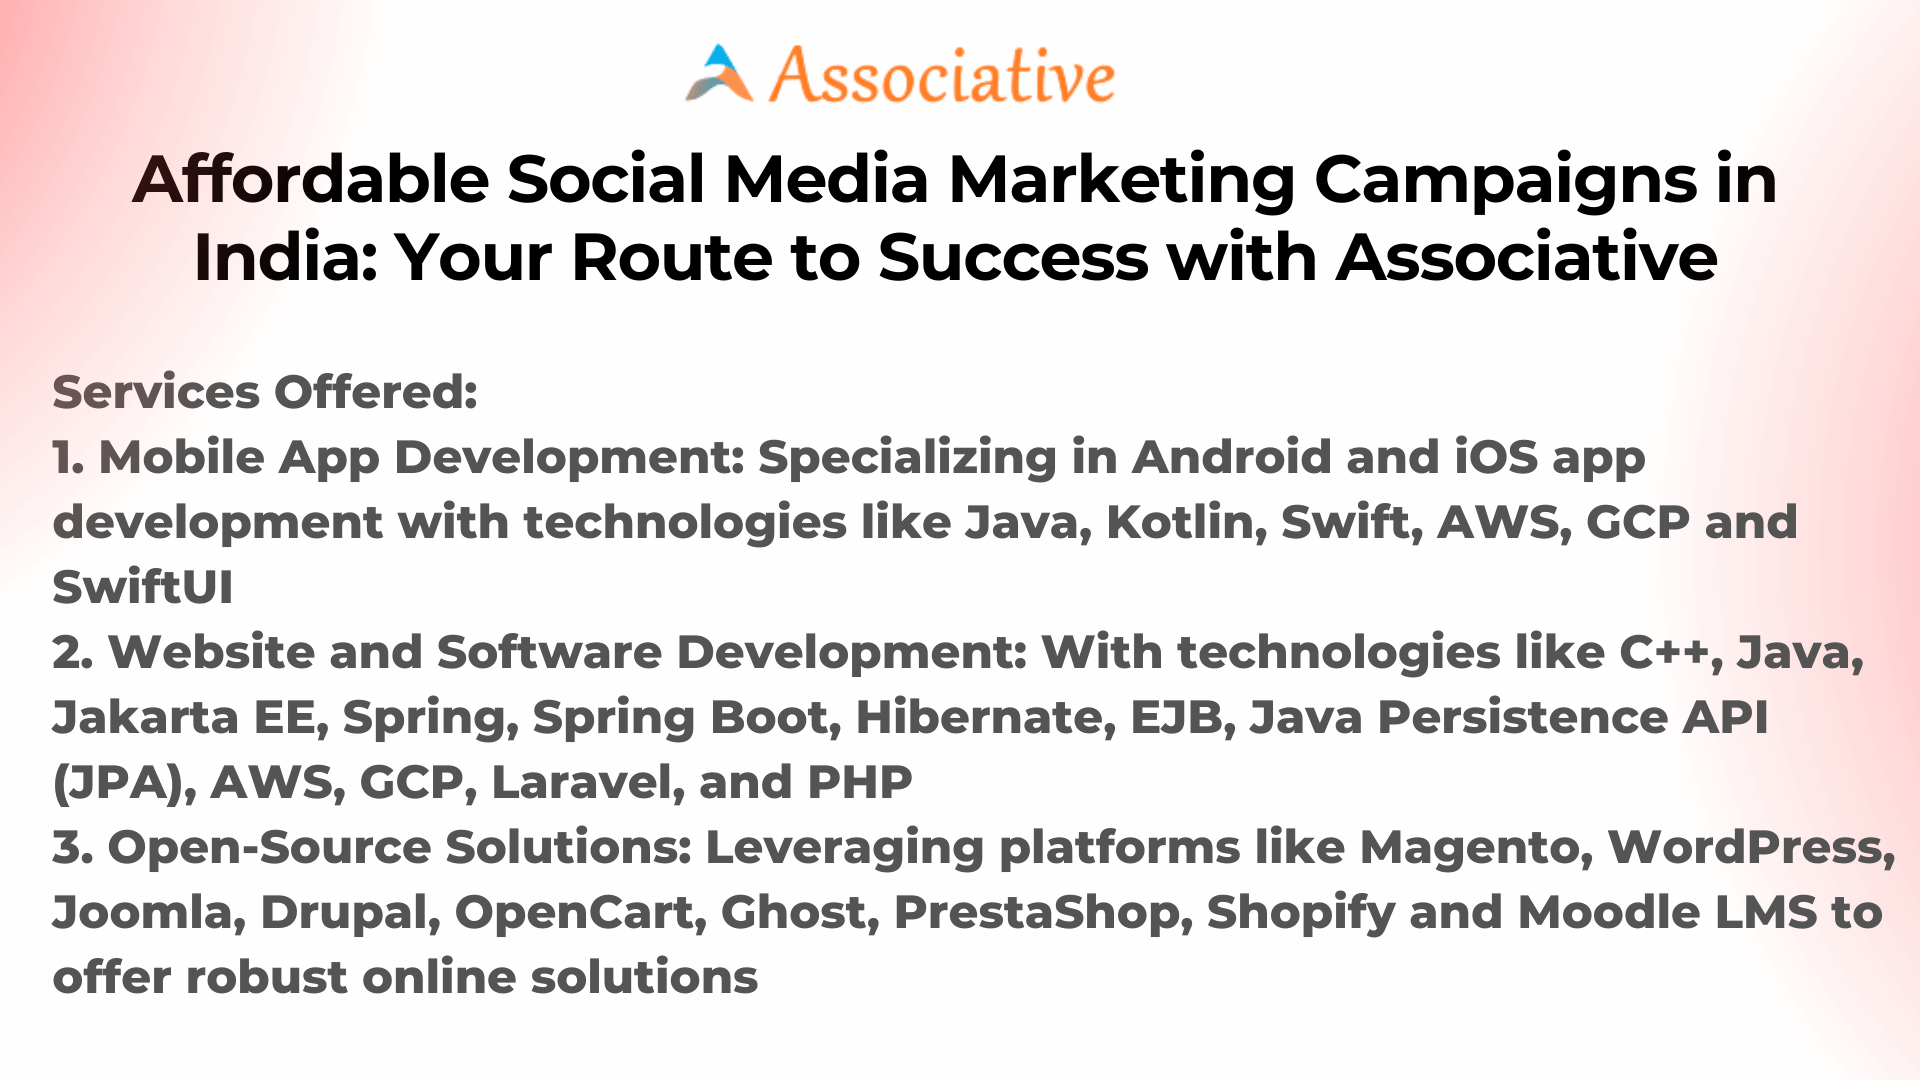 Affordable Social Media Marketing Campaigns in India: Your Route to Success with Associative